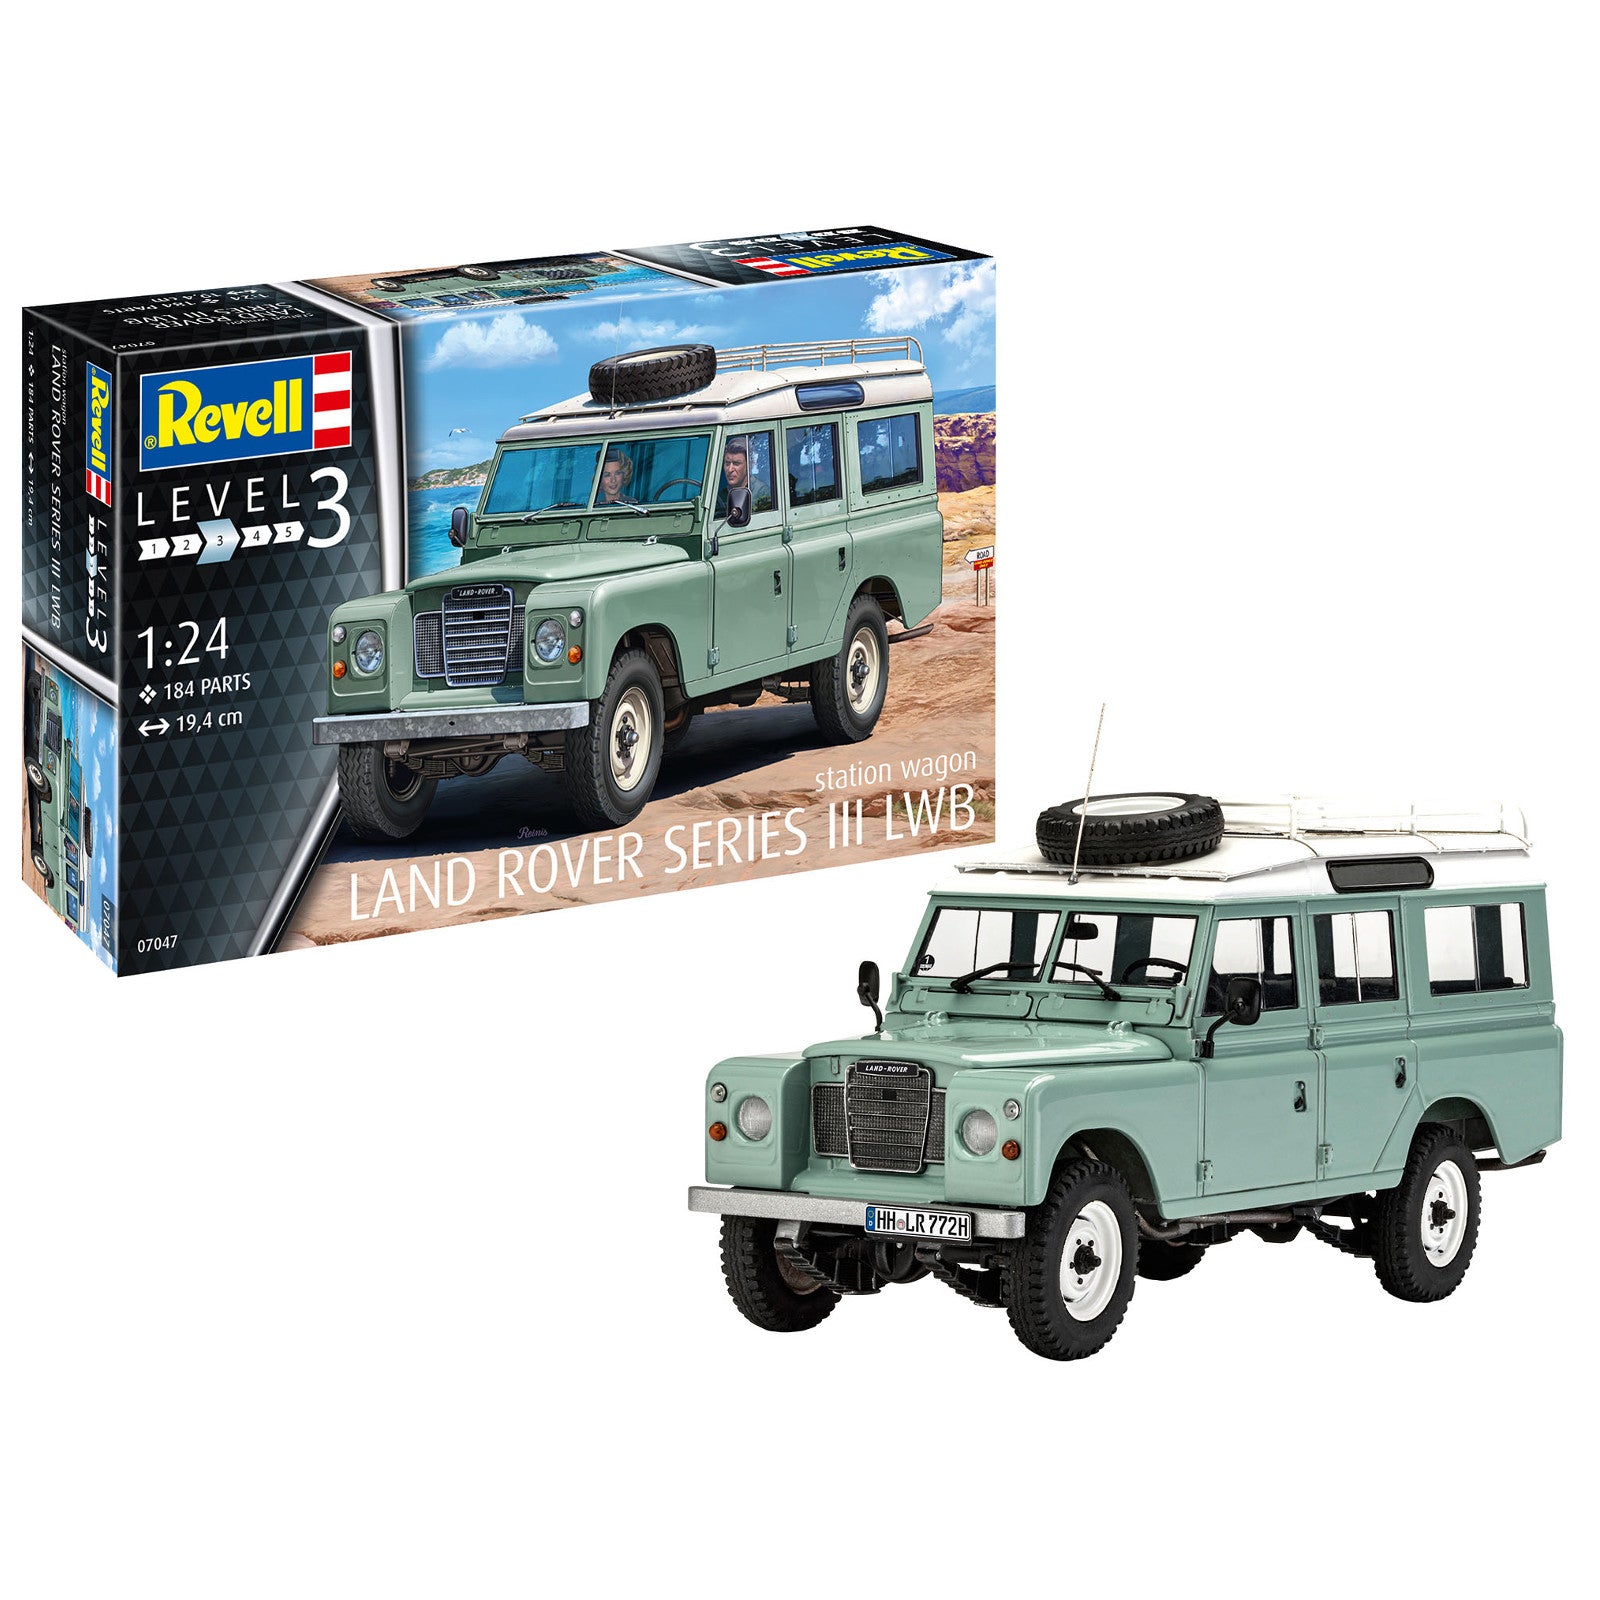 Revell Land Rover Series III 1:24 Scale Car Model Kit